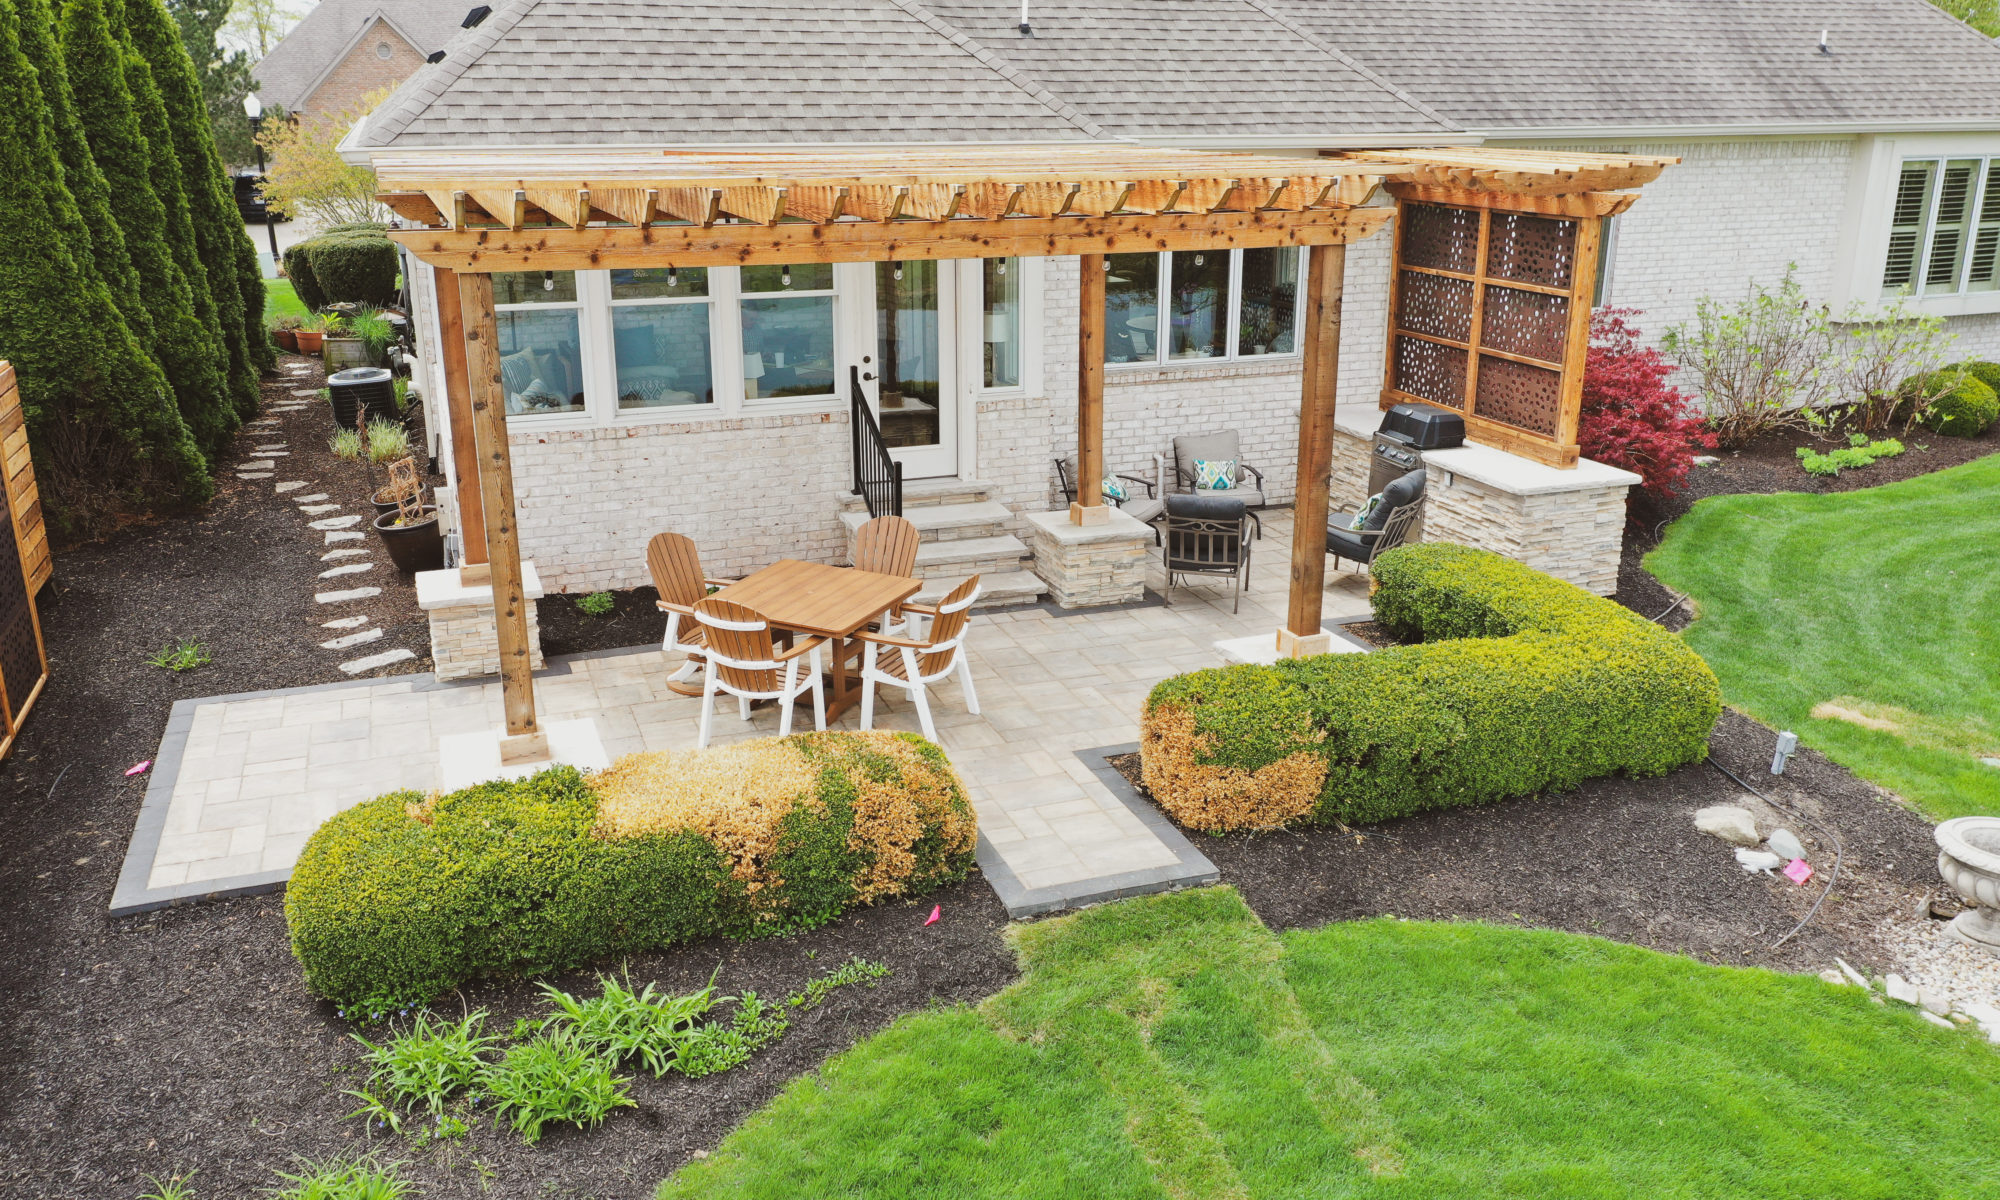 Precision Outdoors Hickory Stick Enclave cedar pergola built-in grill built in paver patio fence privacy screen screens flagstone walkway Bargersville Greenwood Indiana